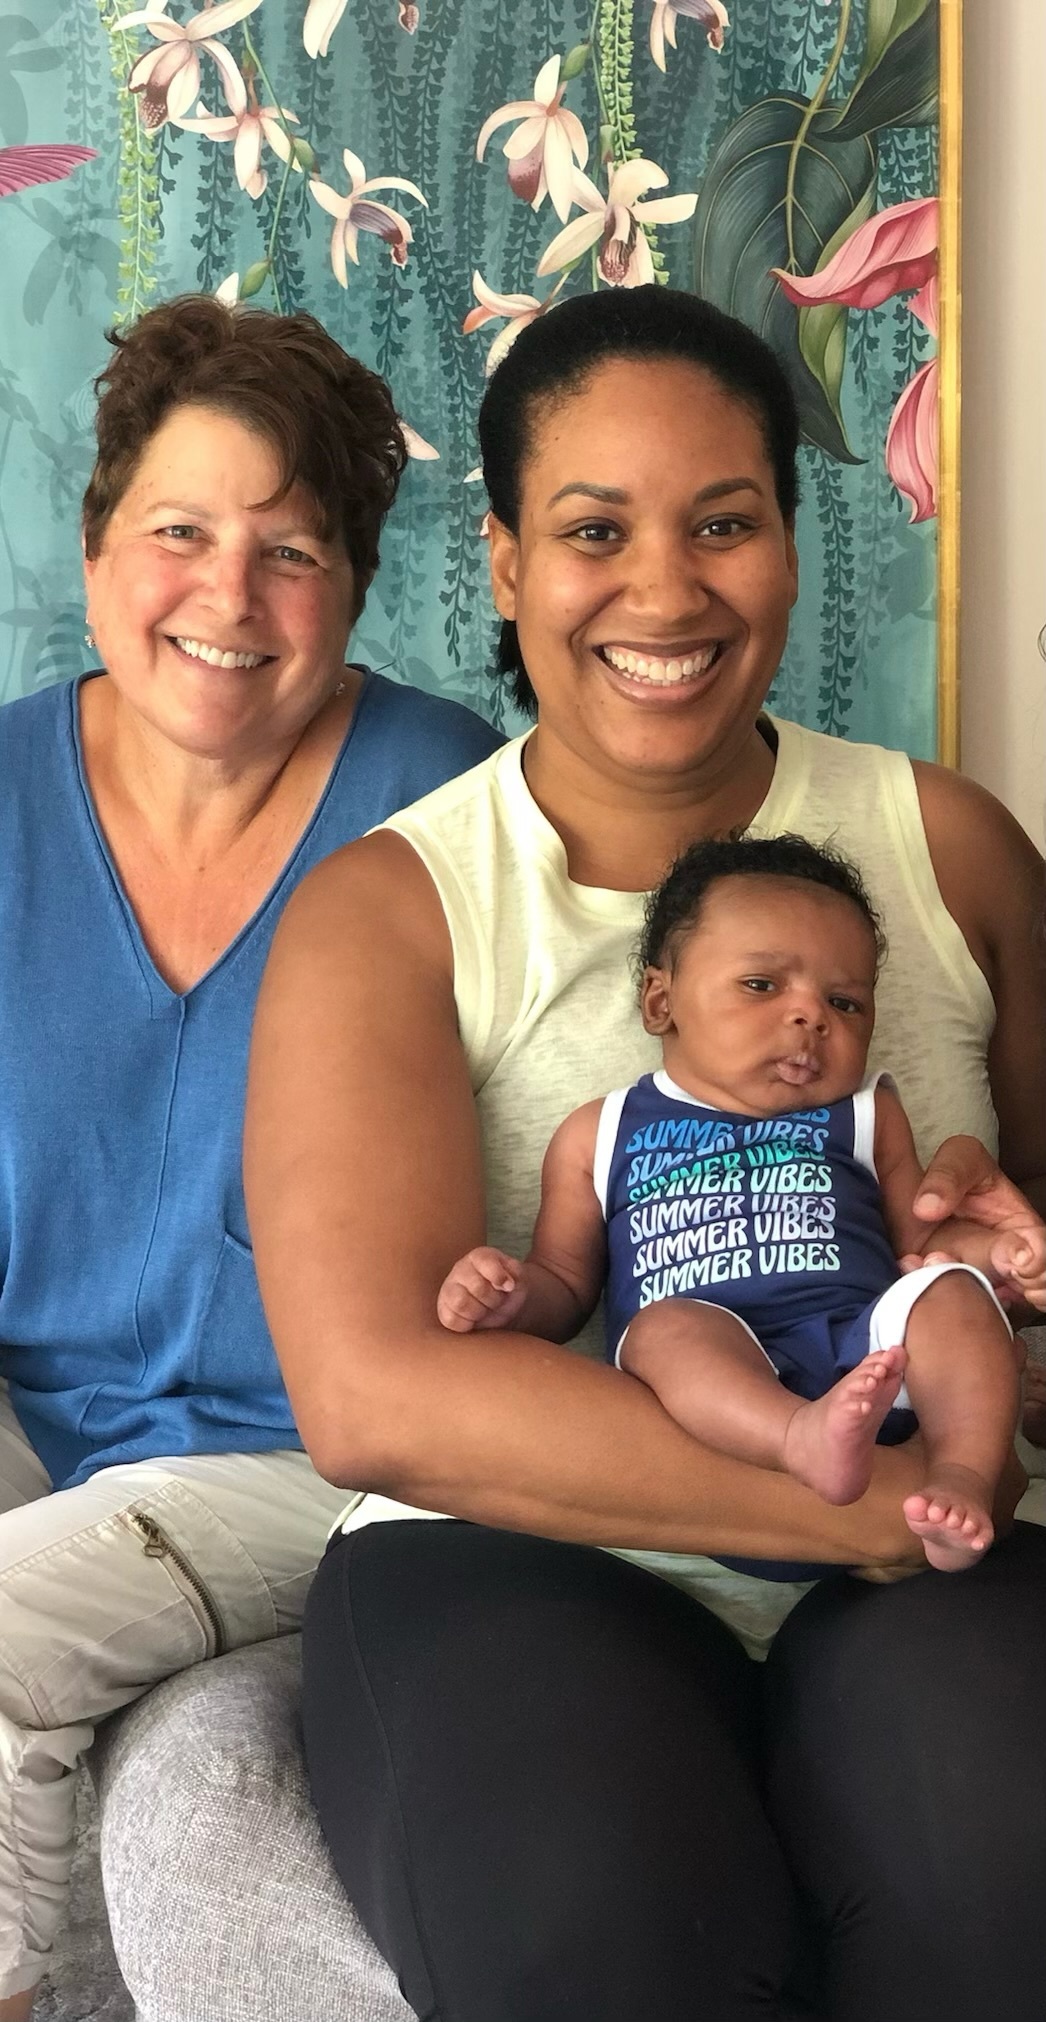 Lori Kling and her client, Dana Jones, with her adopted baby, Chase. COURTESY LORI KLING